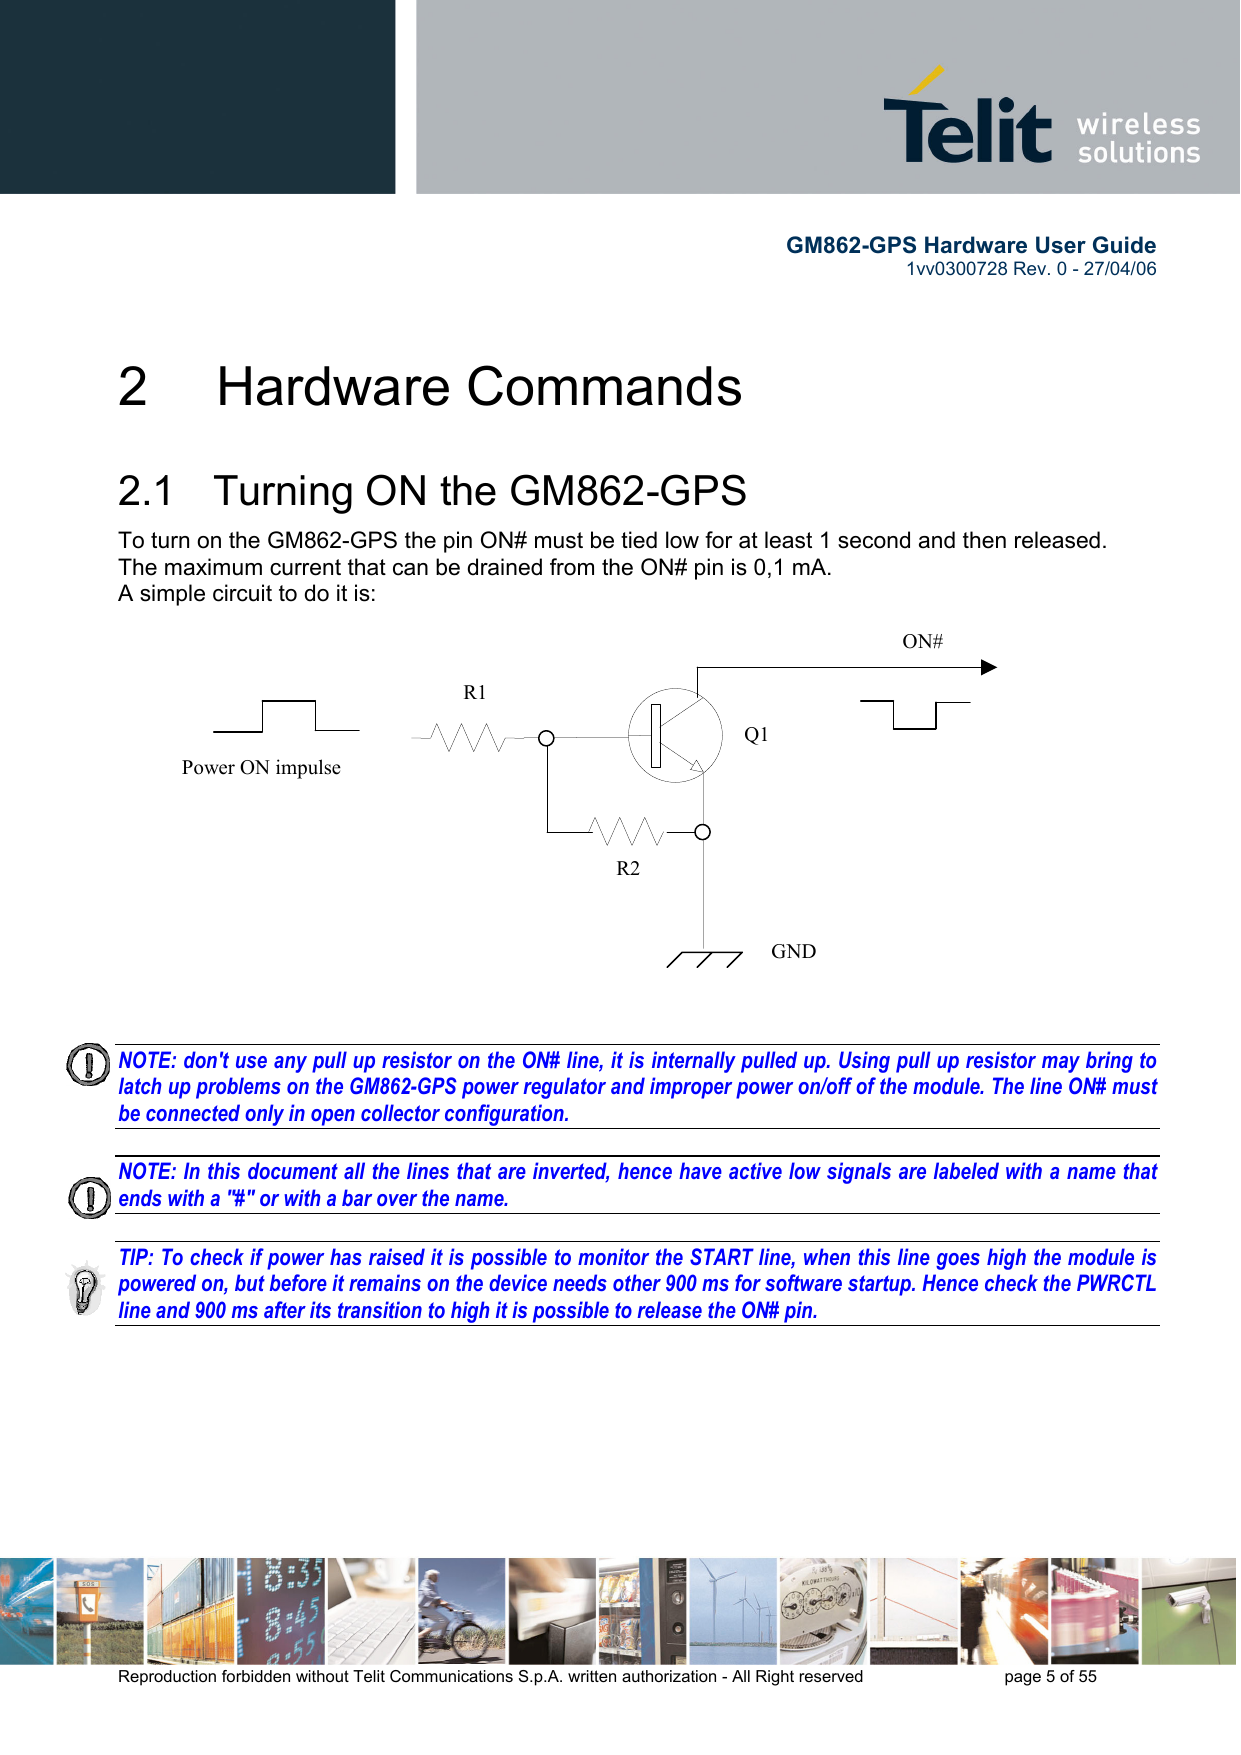        GM862-GPS Hardware User Guide   1vv0300728 Rev. 0 - 27/04/06    Reproduction forbidden without Telit Communications S.p.A. written authorization - All Right reserved    page 5 of 55  2   Hardware Commands 2.1   Turning ON the GM862-GPS To turn on the GM862-GPS the pin ON# must be tied low for at least 1 second and then released. The maximum current that can be drained from the ON# pin is 0,1 mA. A simple circuit to do it is:   NOTE: don&apos;t use any pull up resistor on the ON# line, it is internally pulled up. Using pull up resistor may bring to latch up problems on the GM862-GPS power regulator and improper power on/off of the module. The line ON# must be connected only in open collector configuration.  NOTE: In this document all the lines that are inverted, hence have active low signals are labeled with a name that ends with a &quot;#&quot; or with a bar over the name.  TIP: To check if power has raised it is possible to monitor the START line, when this line goes high the module is powered on, but before it remains on the device needs other 900 ms for software startup. Hence check the PWRCTL line and 900 ms after its transition to high it is possible to release the ON# pin.     ON#Power ON impulse  GNDR1R2Q1